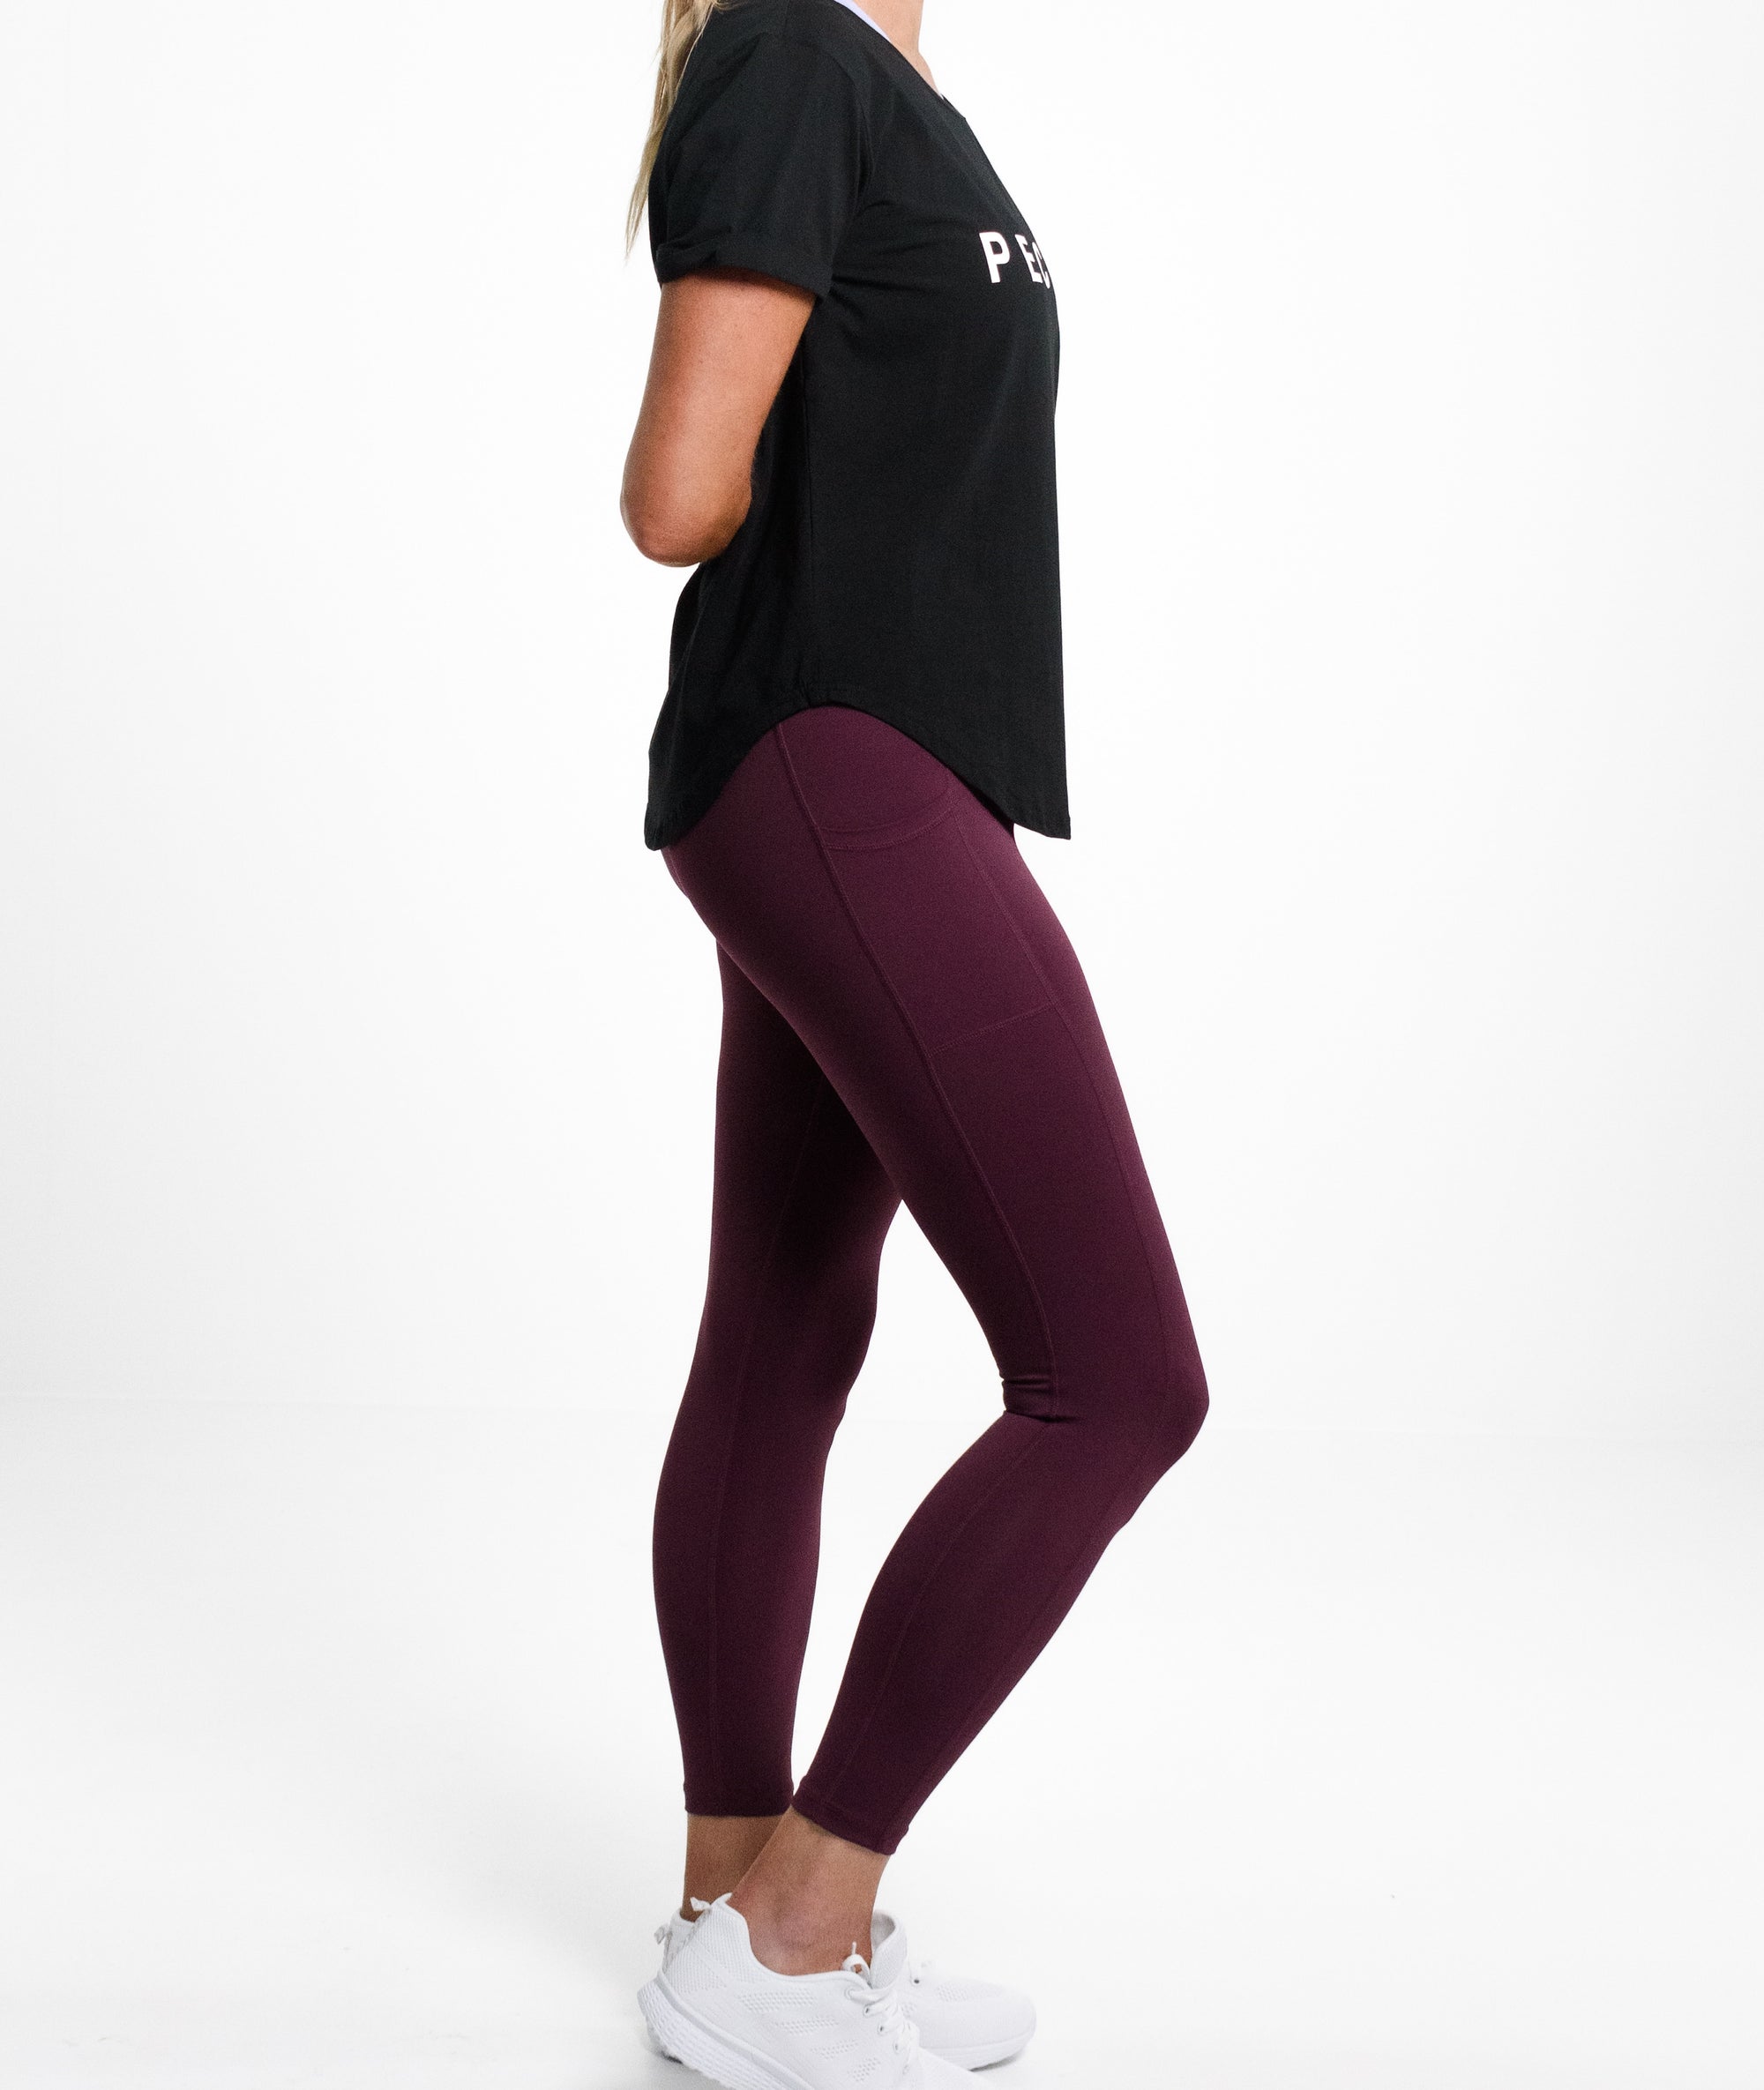 LUX Lola Full Length Phone Pocket Tight - Berry Red